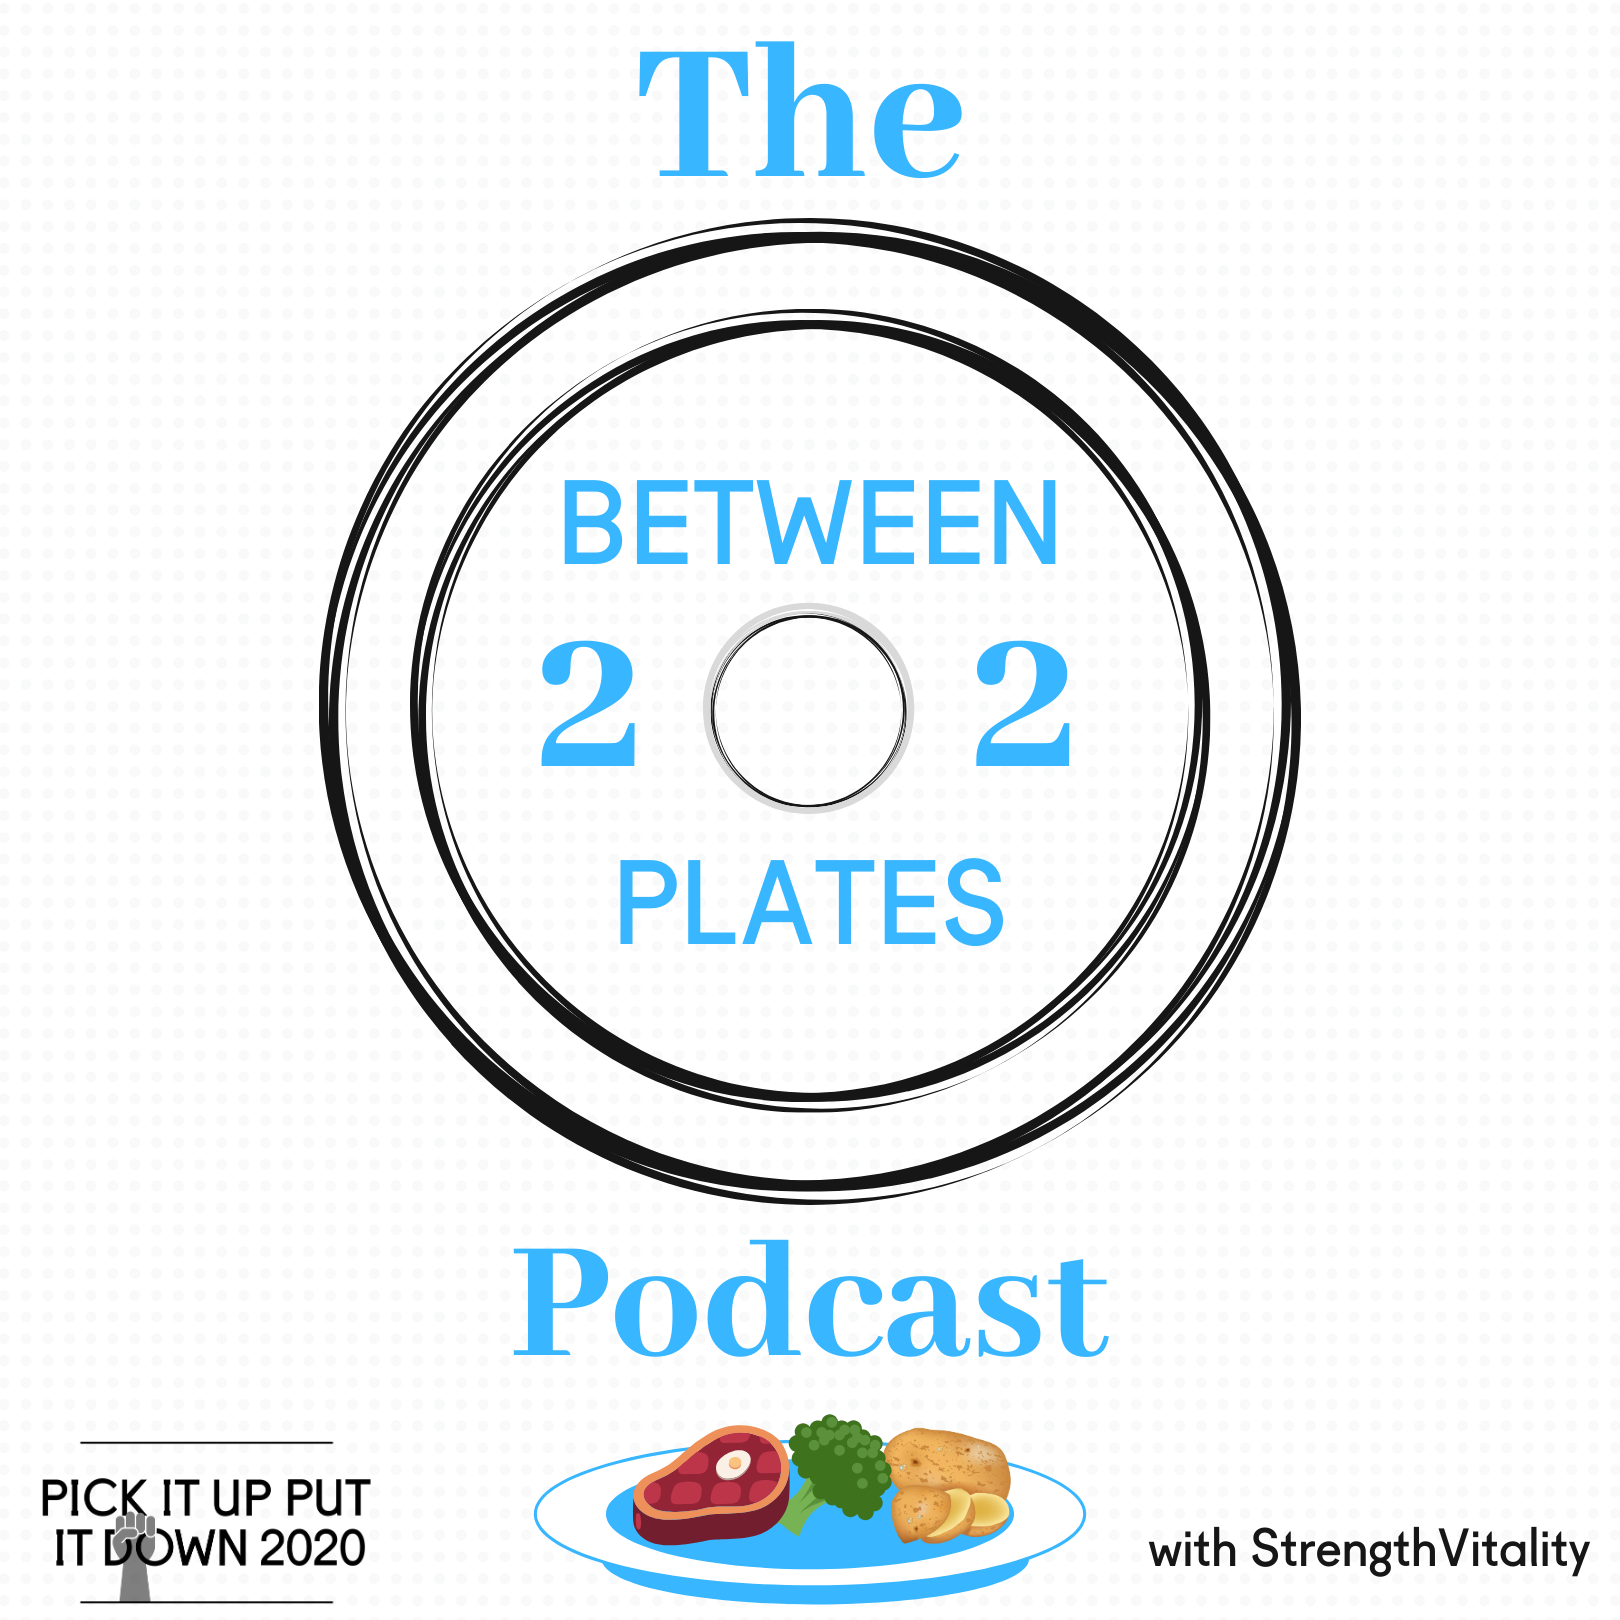 The Between Two Plates Podcast